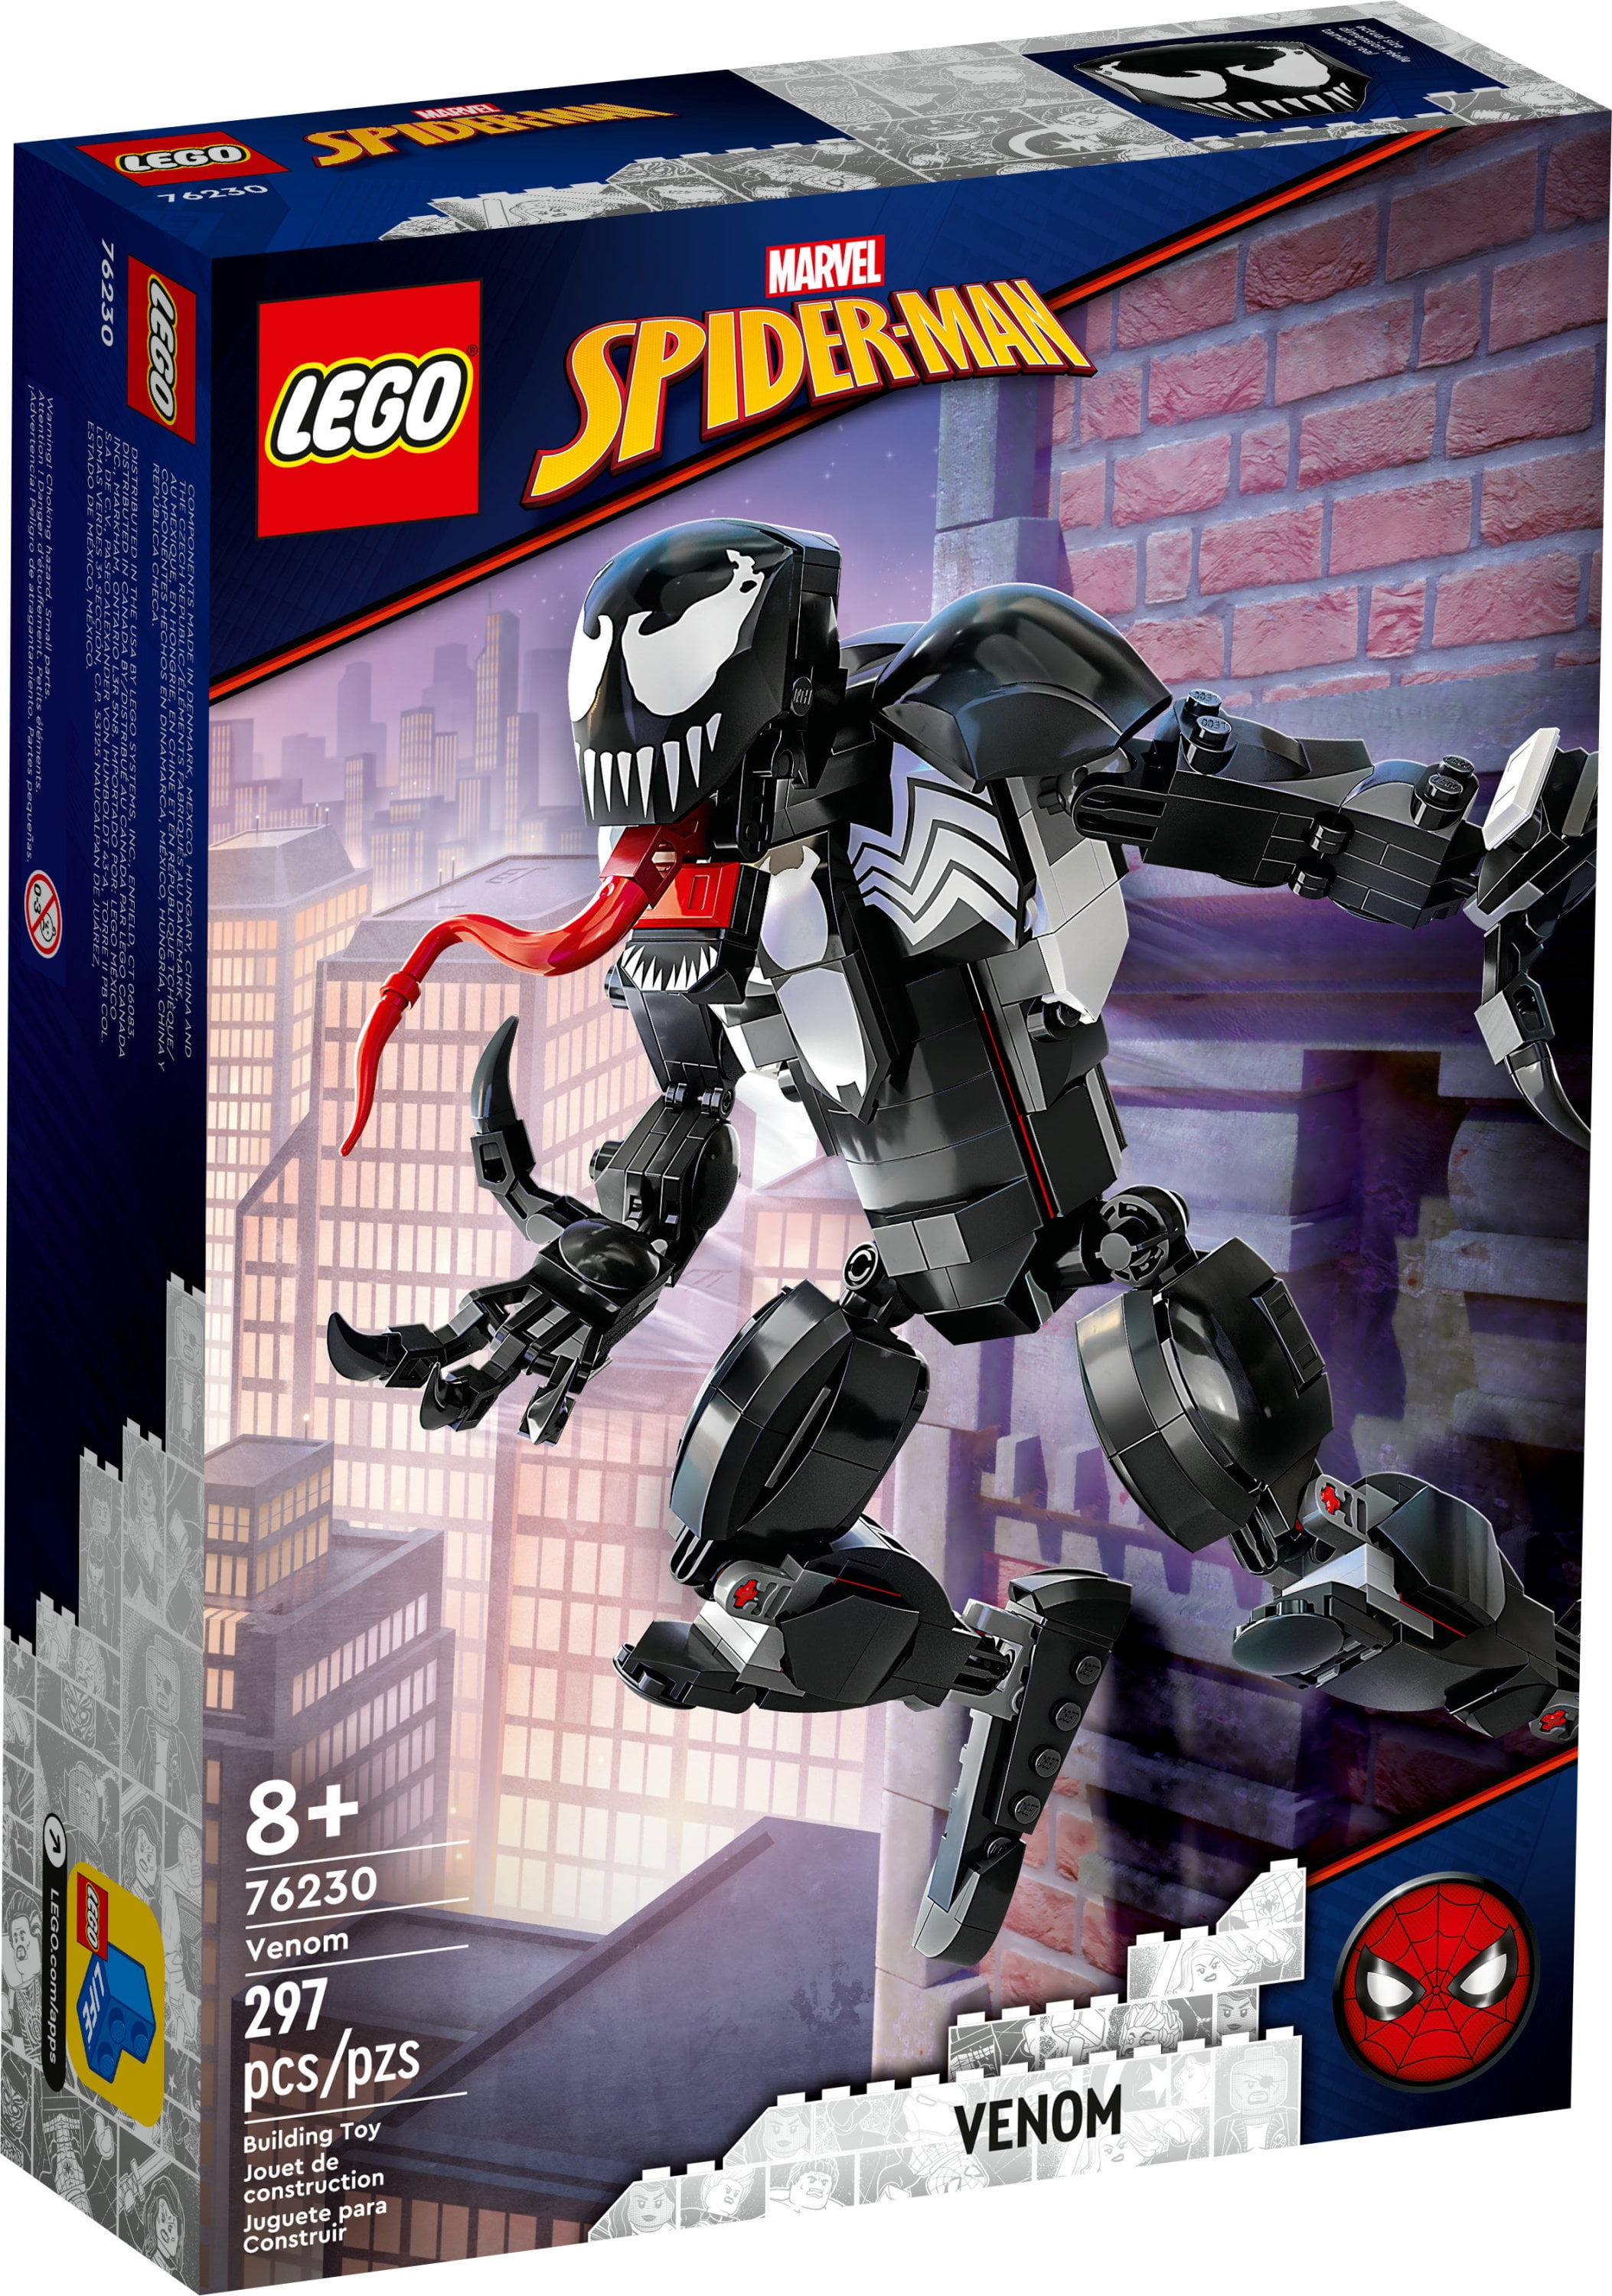 LEGO Marvel Venom Figure, 76230 Fully Articulated Super Villain Action Toy, Universe Collectible Set, Alien Toys for Boys and Girls